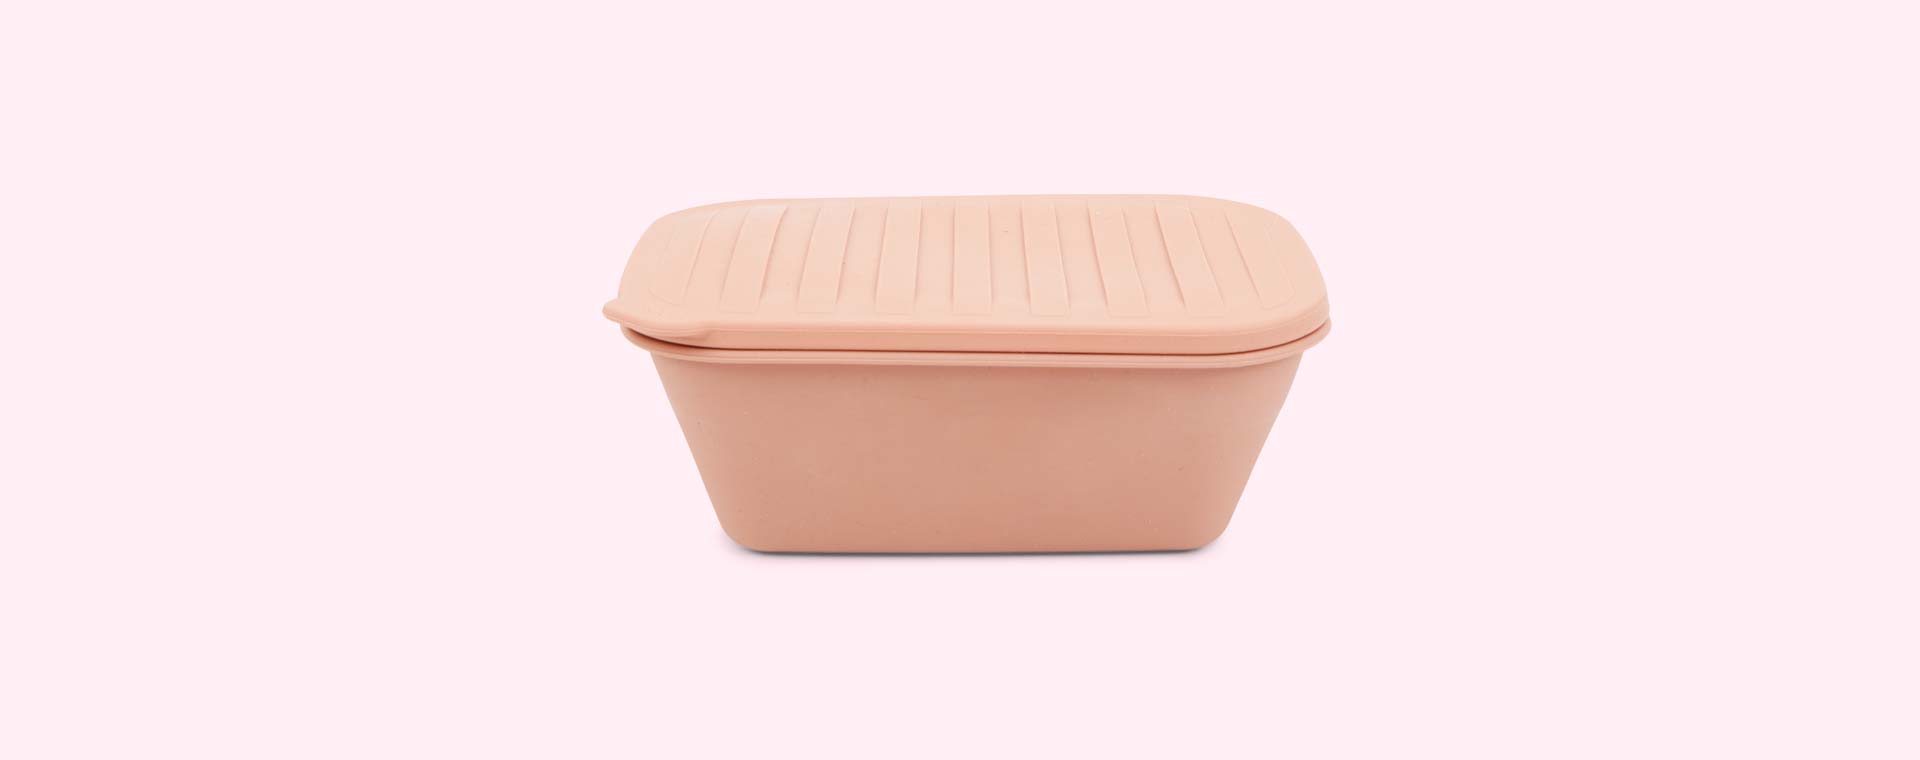 Tuscany Rose/Pale Tuscany Mix Liewood Franklin Foldable Lunch Box